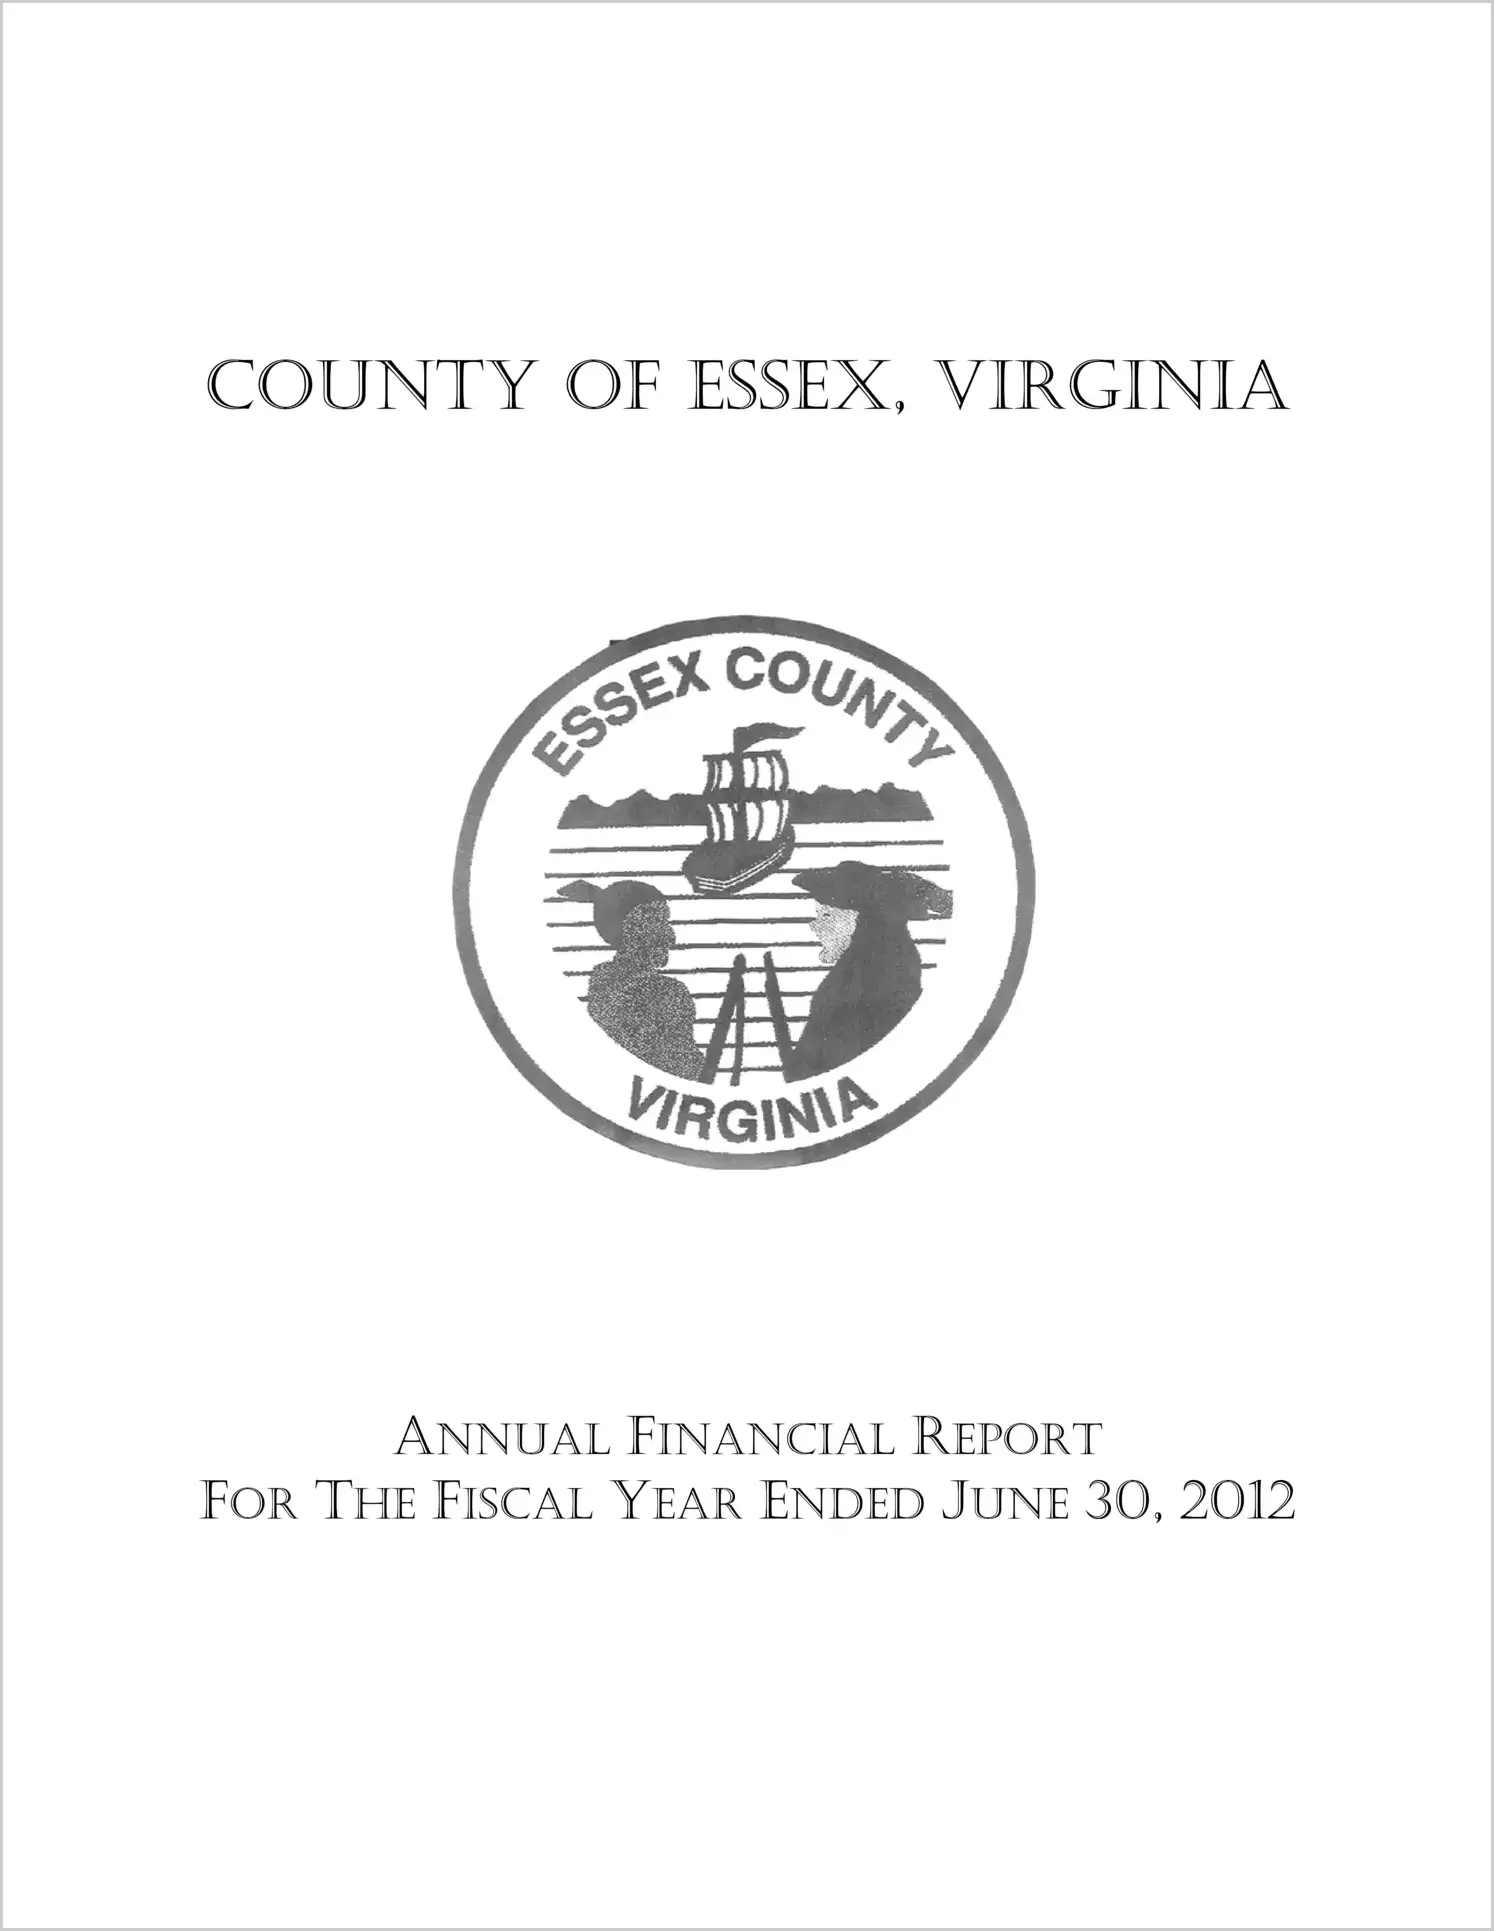 2012 Annual Financial Report for County of Essex